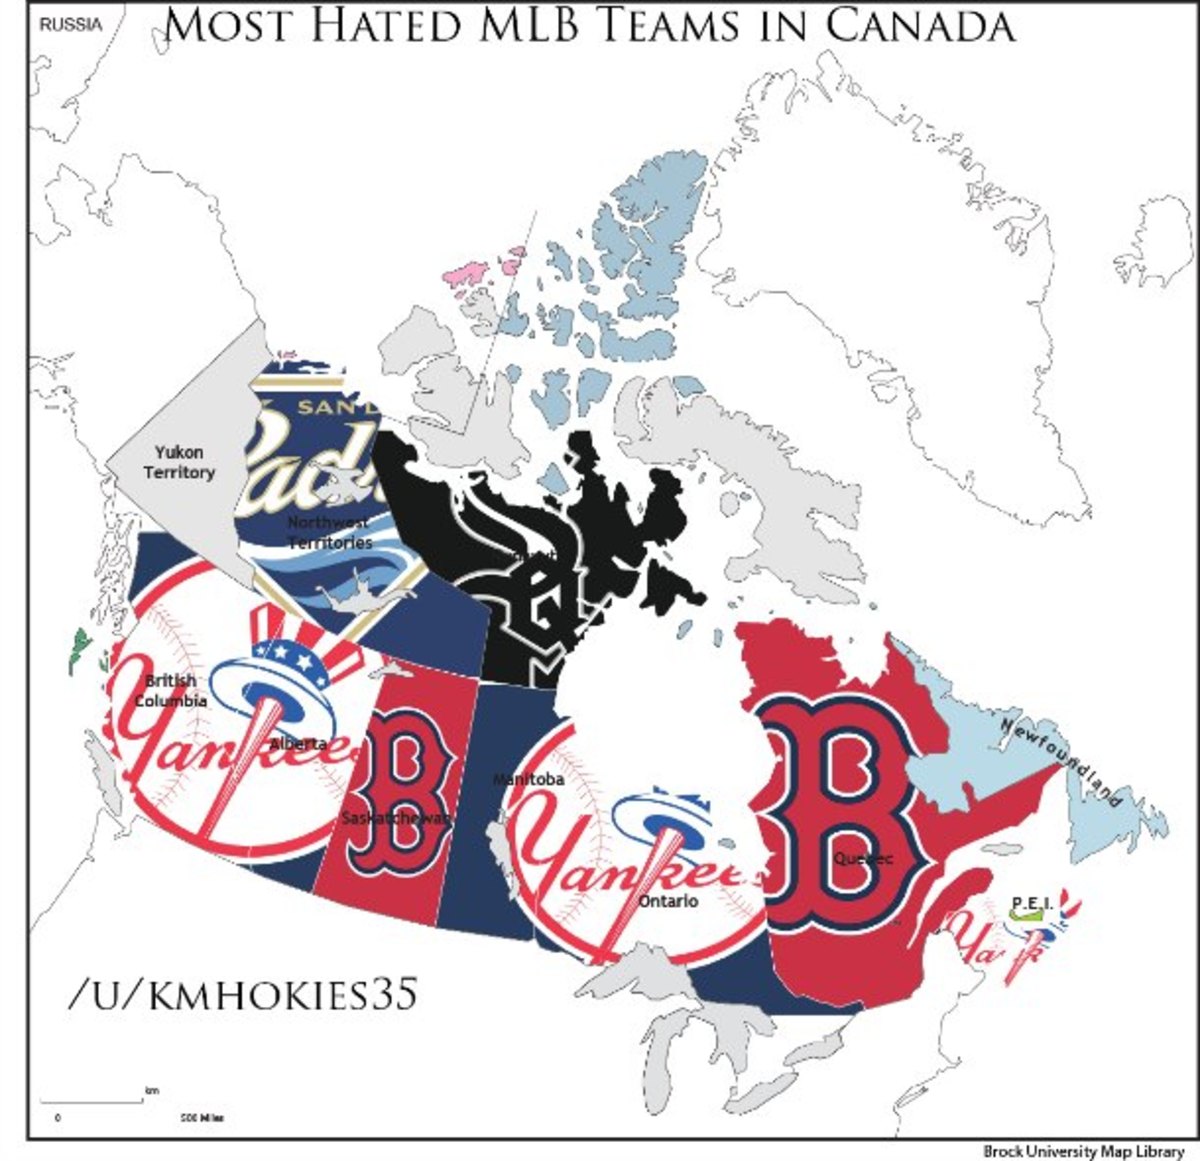 Graphic of the Most Hated MLB Teams by Continent